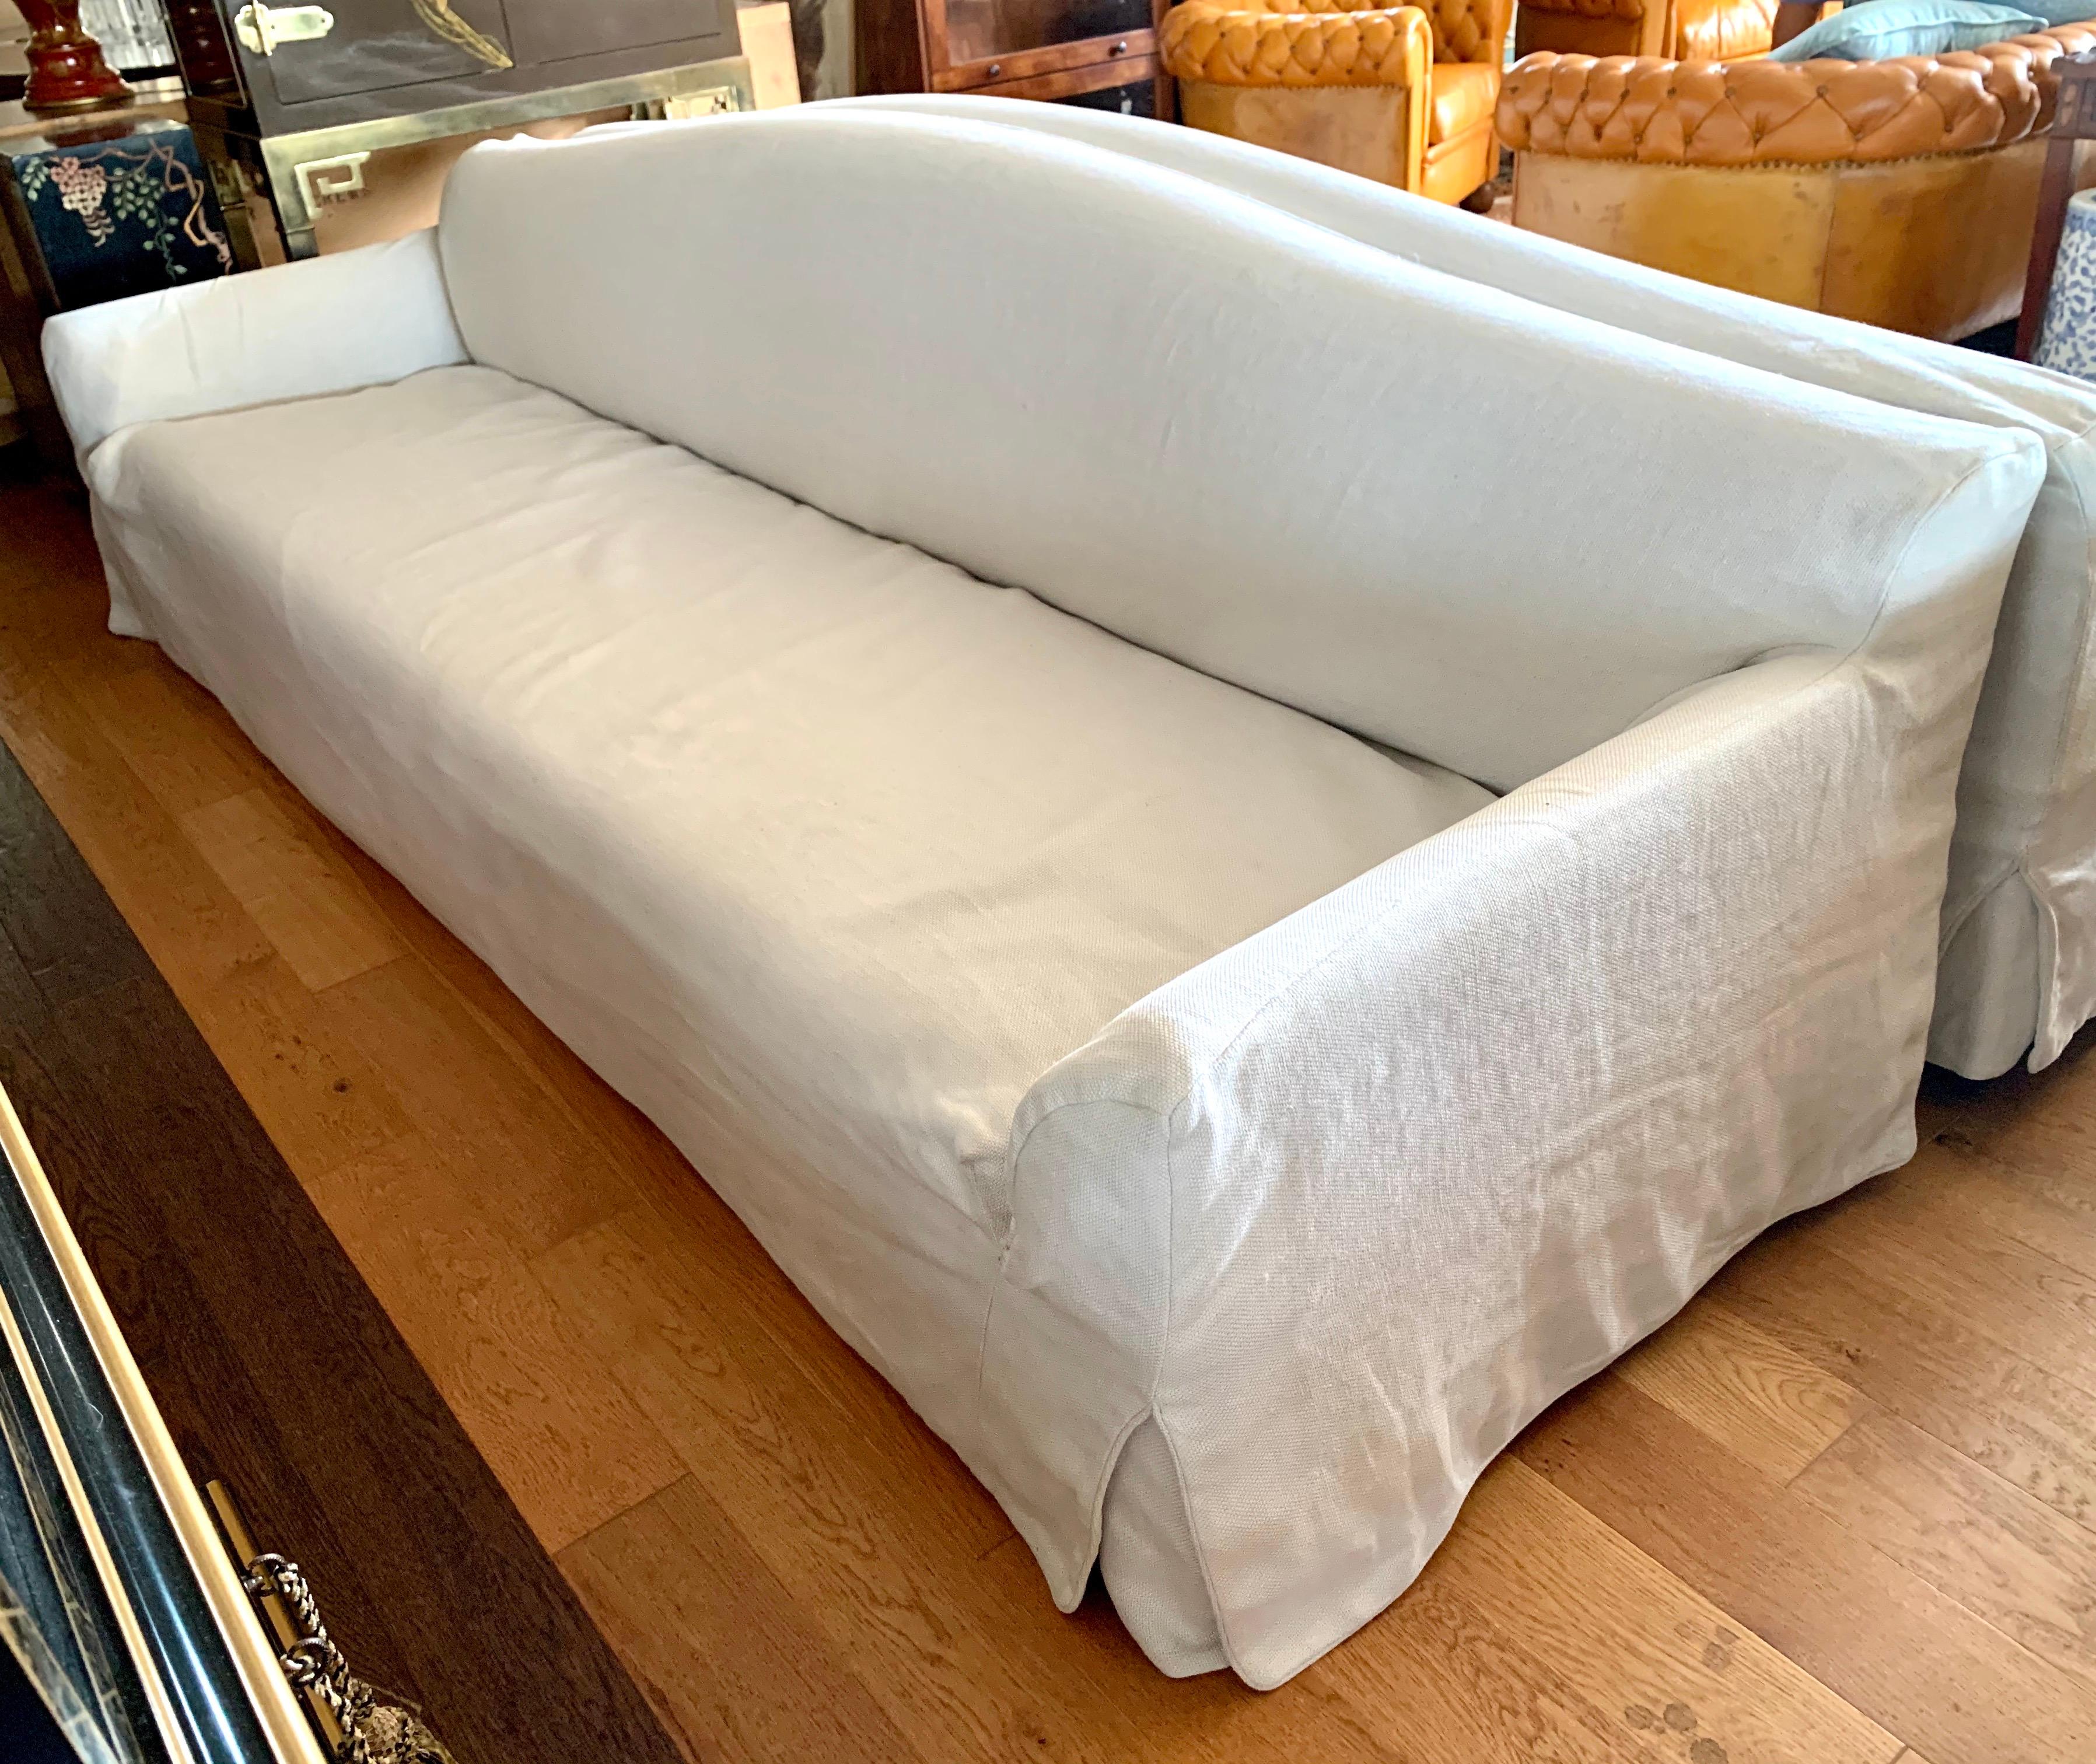 Elegant, large, Christian Liaigre Terra linen sofa for Holly Hunt with removable slipcover. It features a camelback backrest which gives this transitional beauty a classic look.
All manufacturing hallmarks present underneath. Now, more than ever,